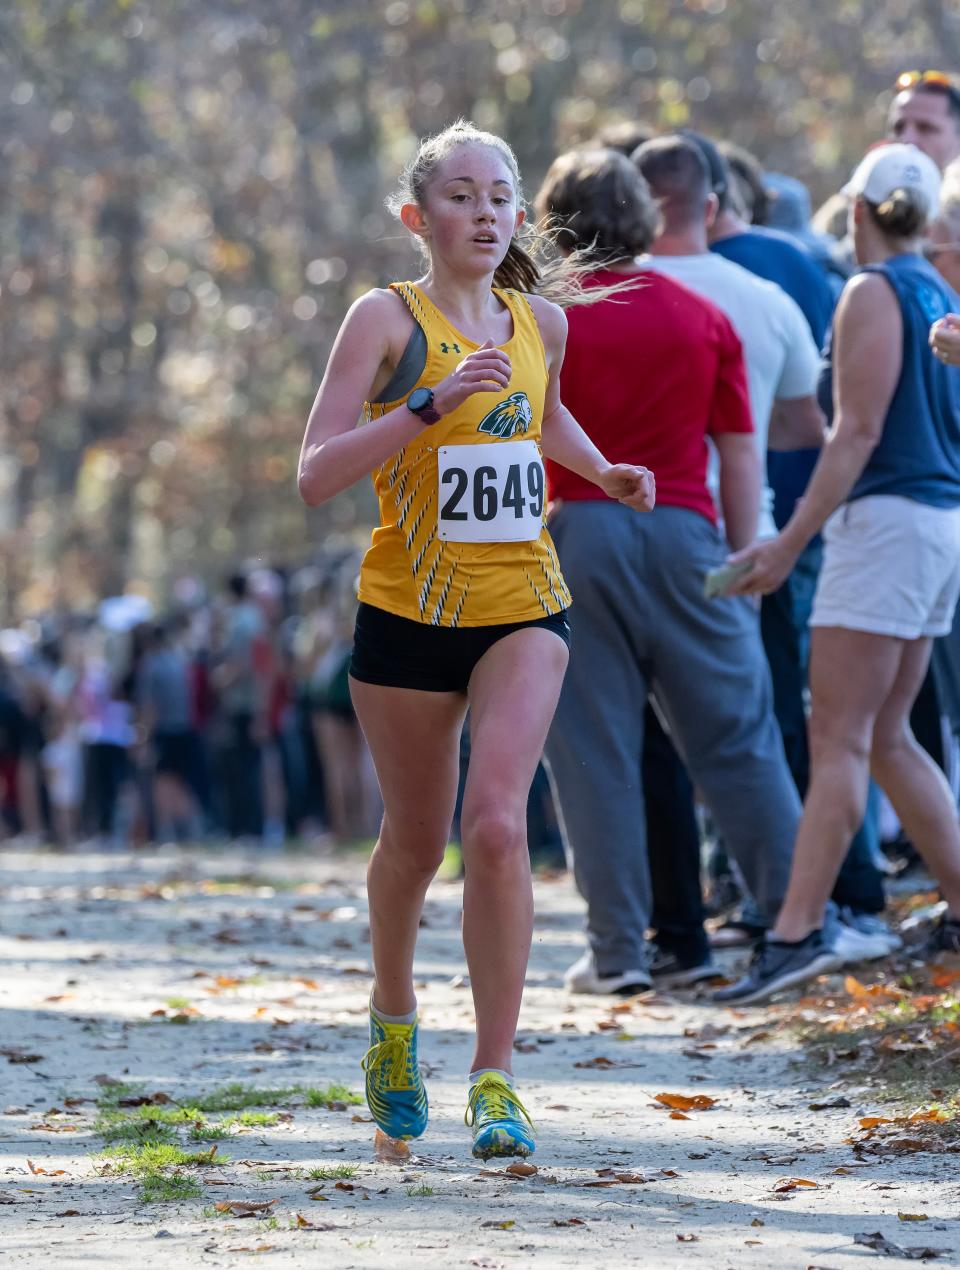 Indian River’s Brynn Crandell runs to victory in the DIAA Division II Girls Cross Country Championship on Saturday at Killens Pond State Park.